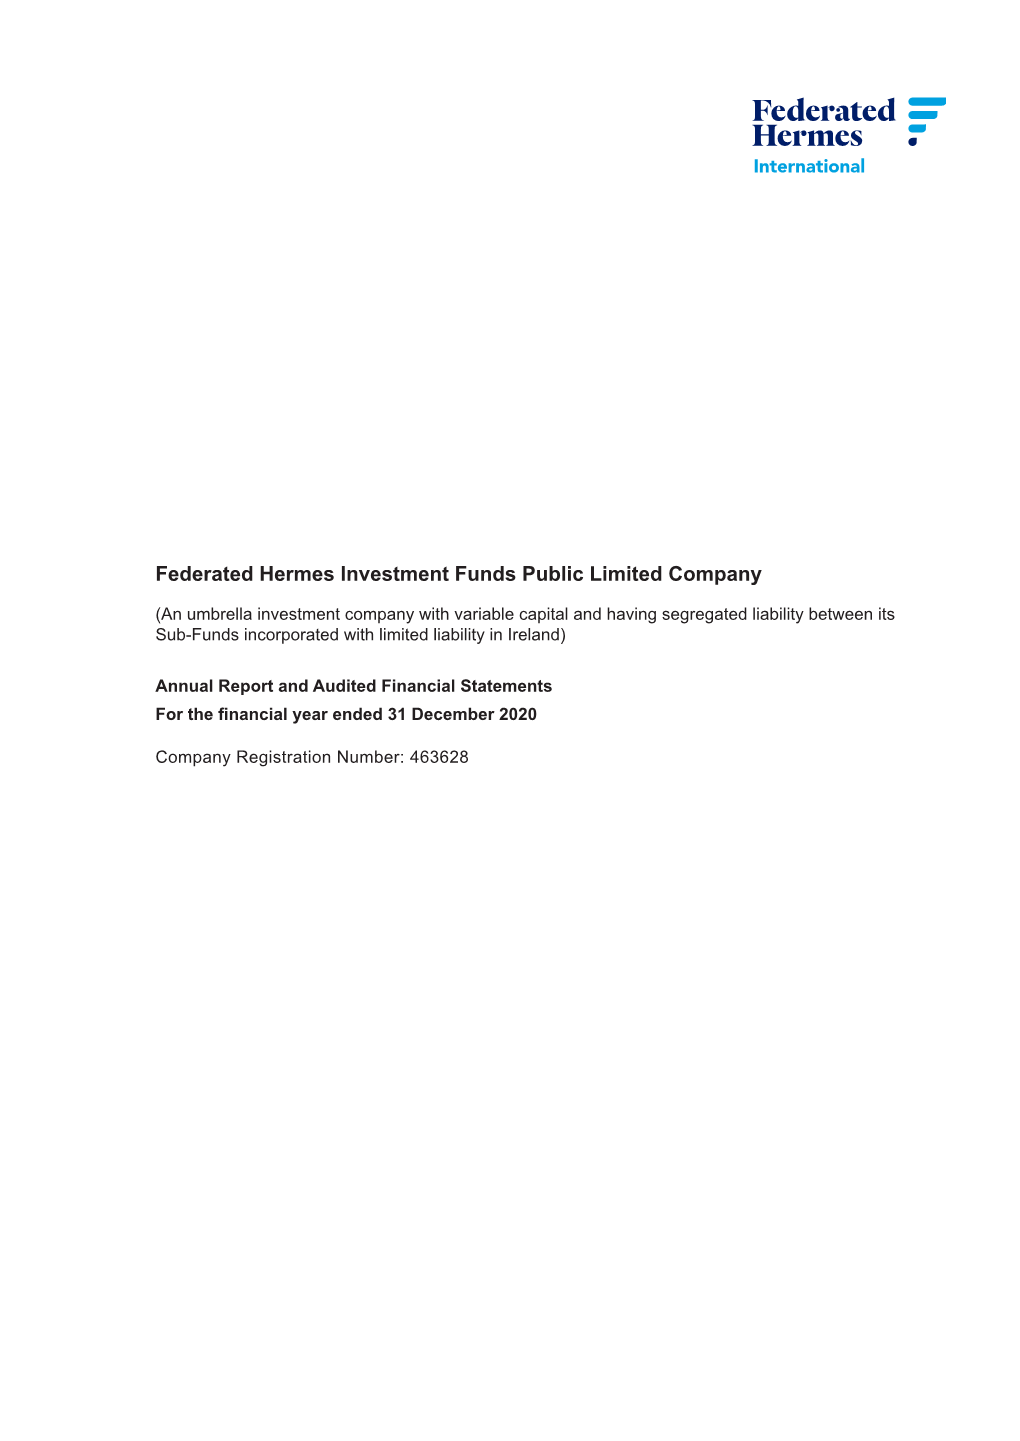 Federated Hermes Investment Funds Public Limited Company